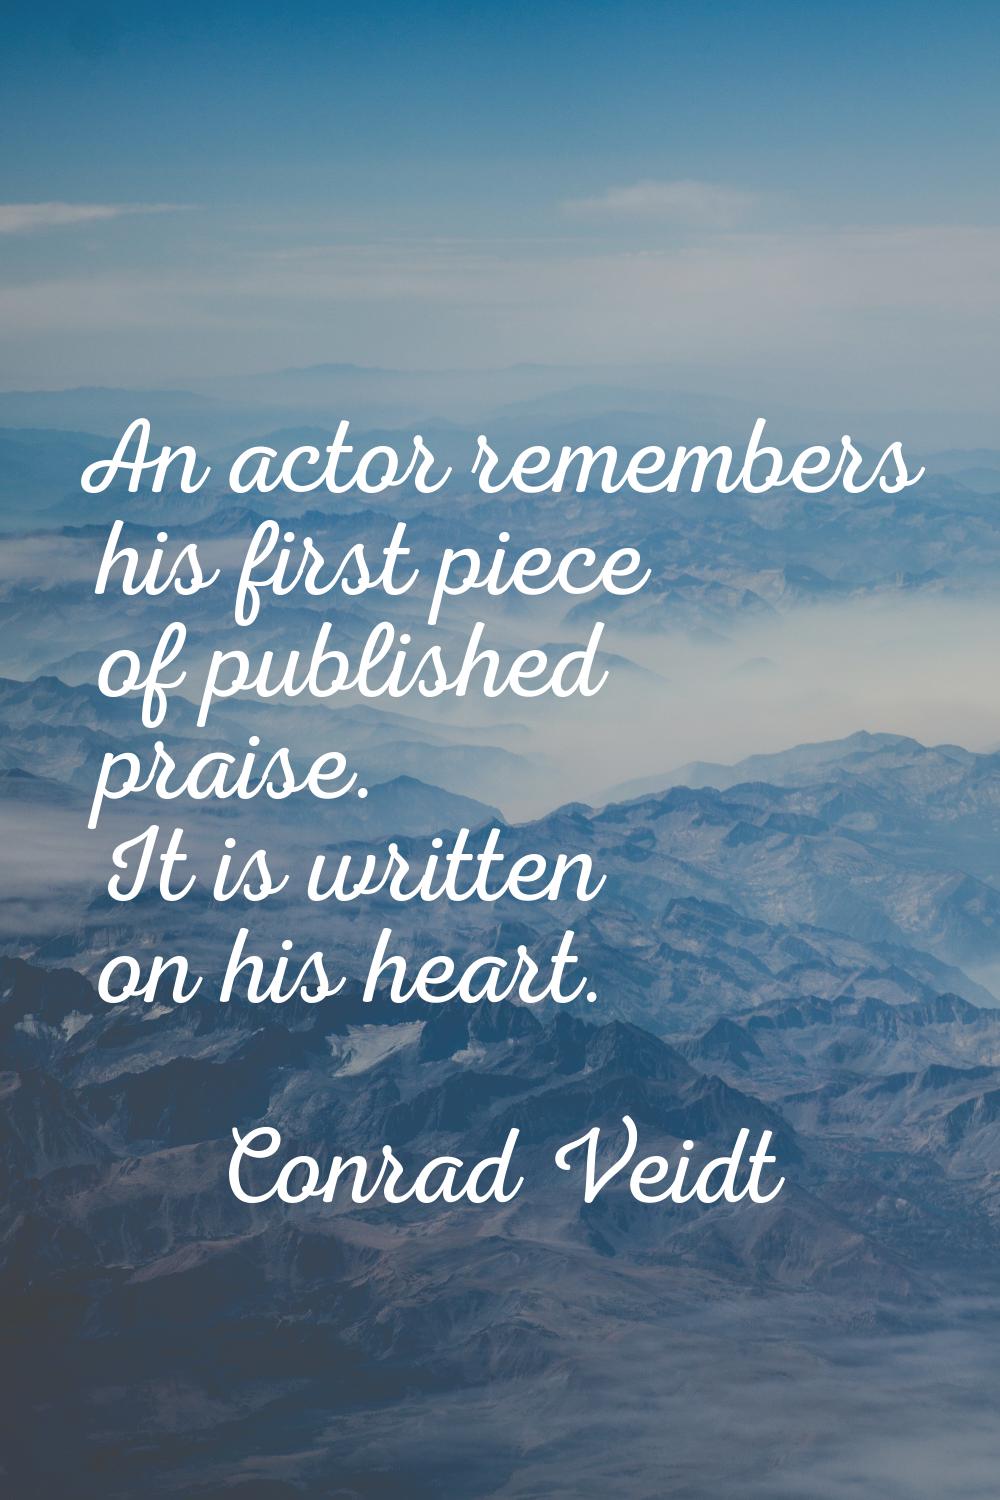 An actor remembers his first piece of published praise. It is written on his heart.